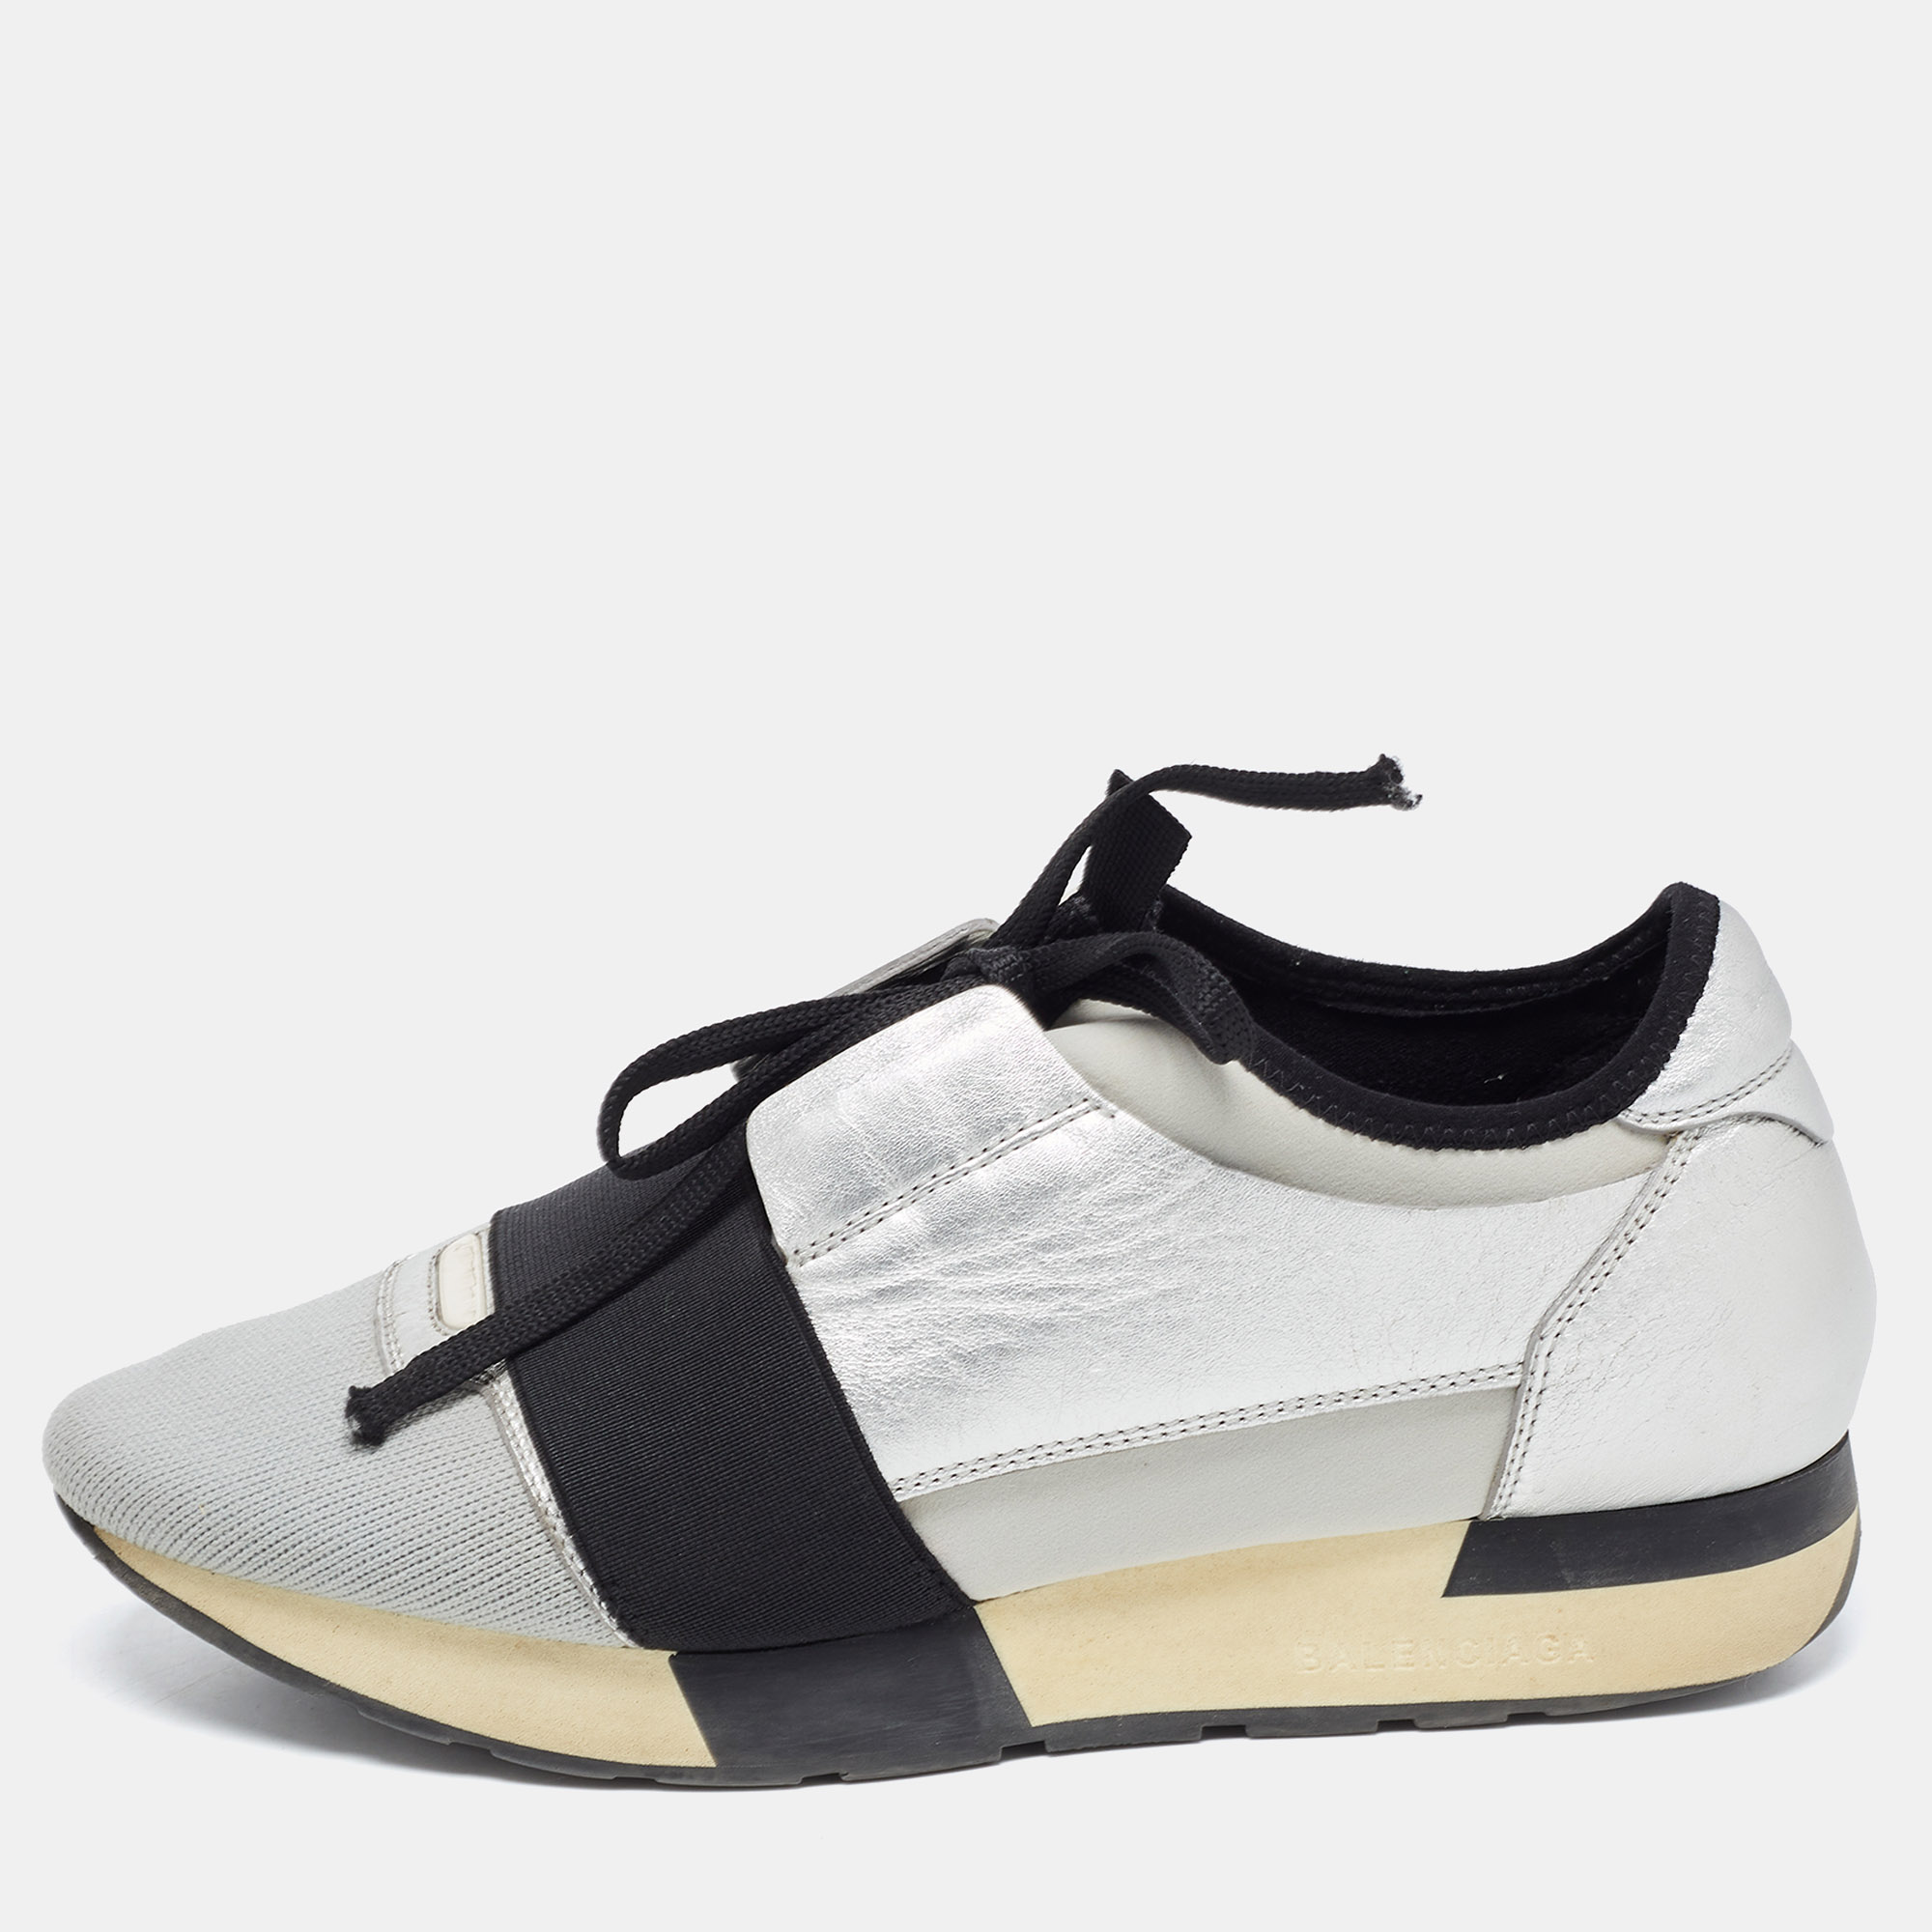 The Balenciaga Race Runner sneakers have been crafted from quality materials and feature a chic silhouette. They flaunt covered toes strap detailing on the vamps and tie up fastenings. They are complete with a leather lined insole and a tough base to provide maximum comfort when walking. The sneakers are perfect for a fun day out with friends.